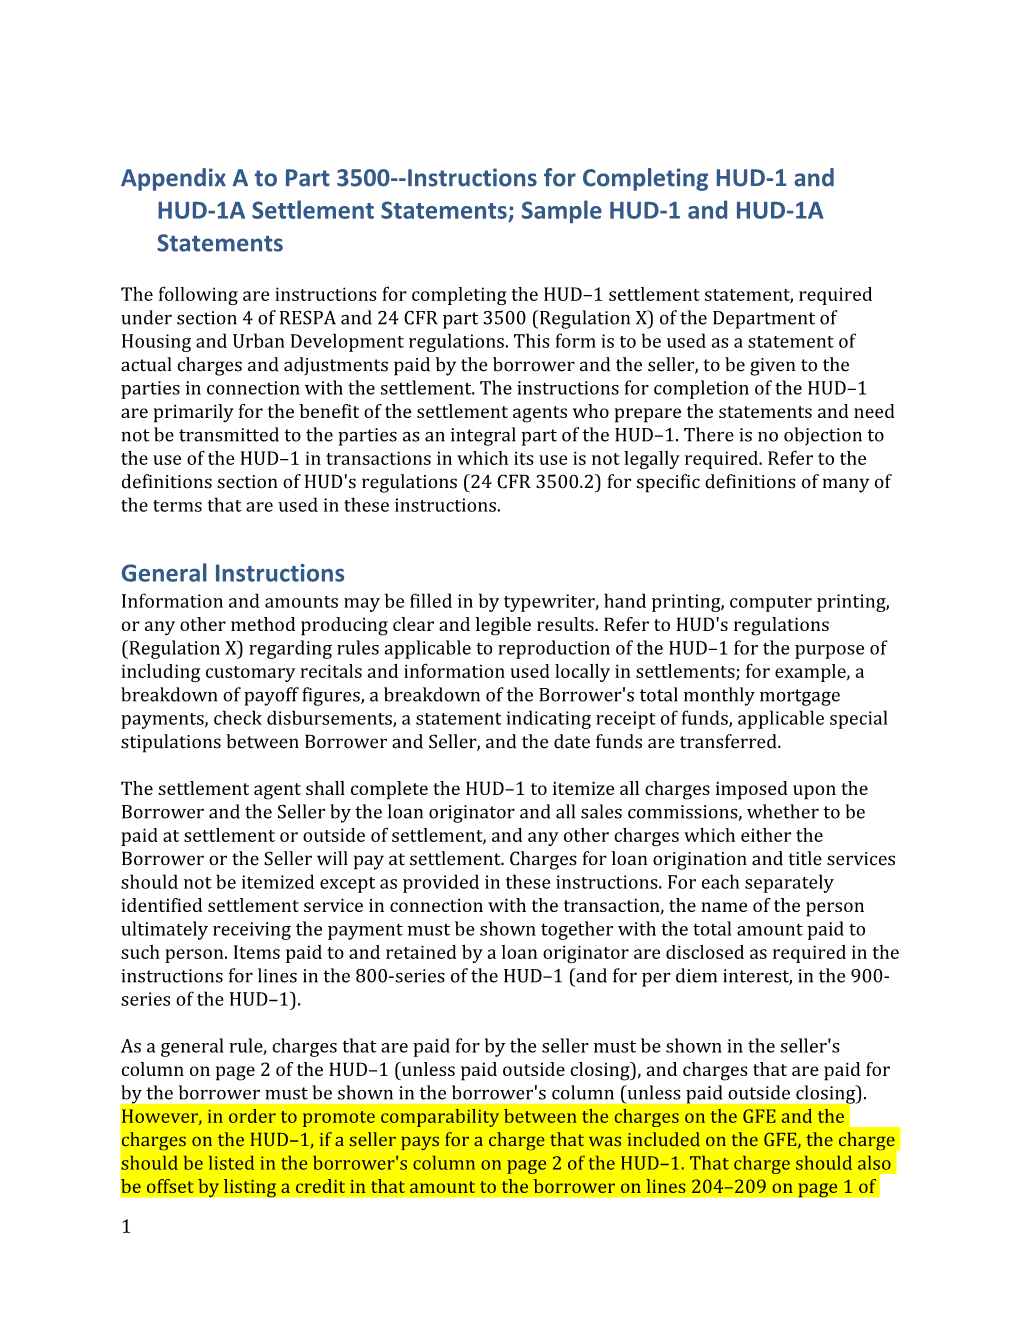 Appendix a to Part 3500 Instructions for Completing HUD-1 and HUD-1A Settlement Statements;